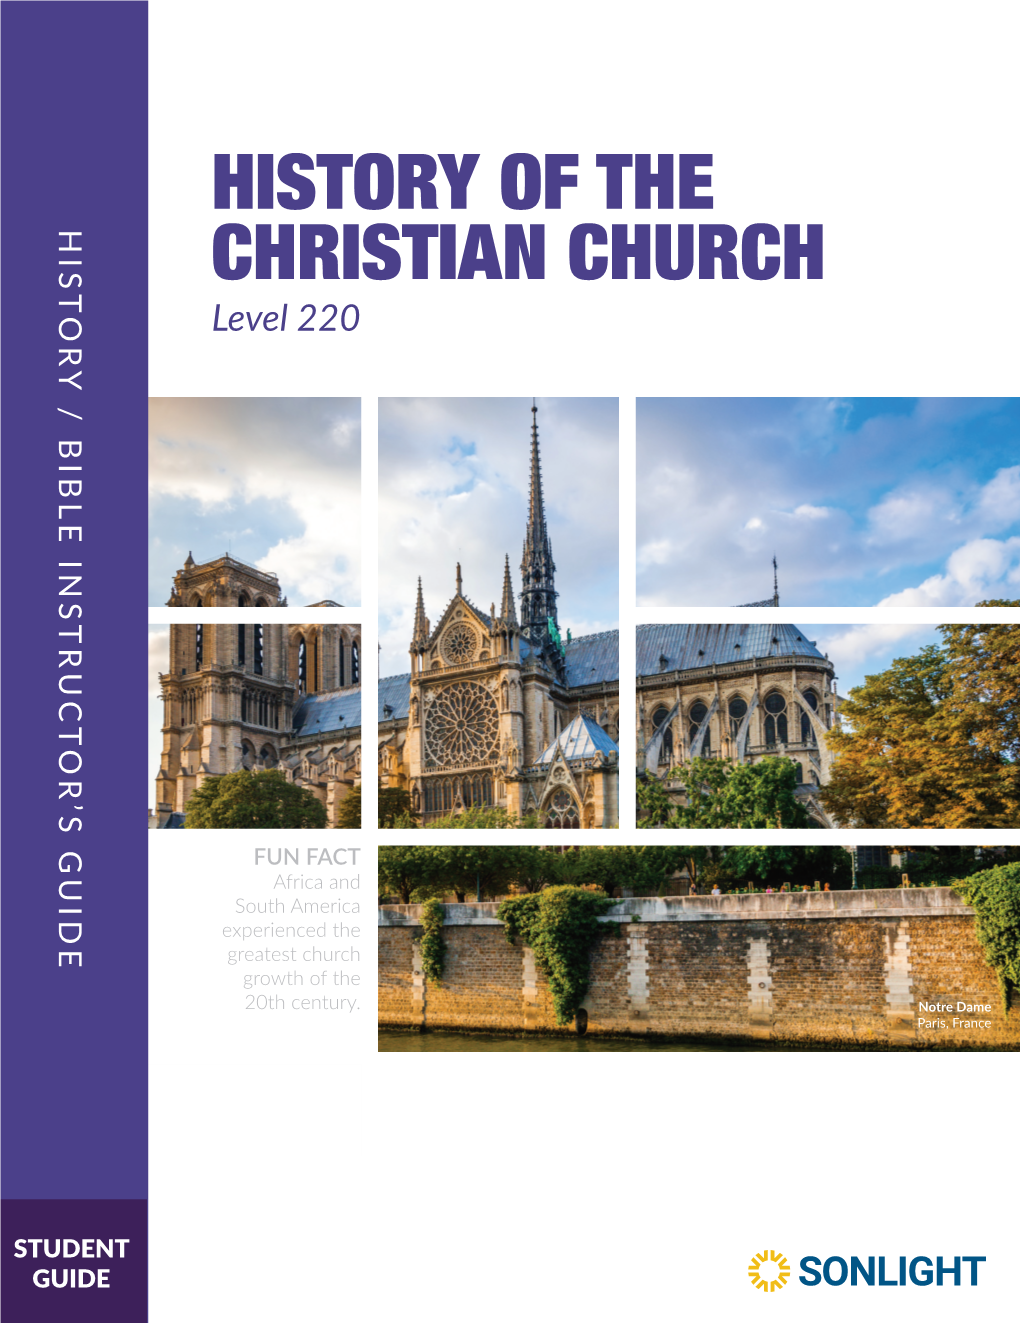 History-Bible 220 Student Guide Sample.Pdf